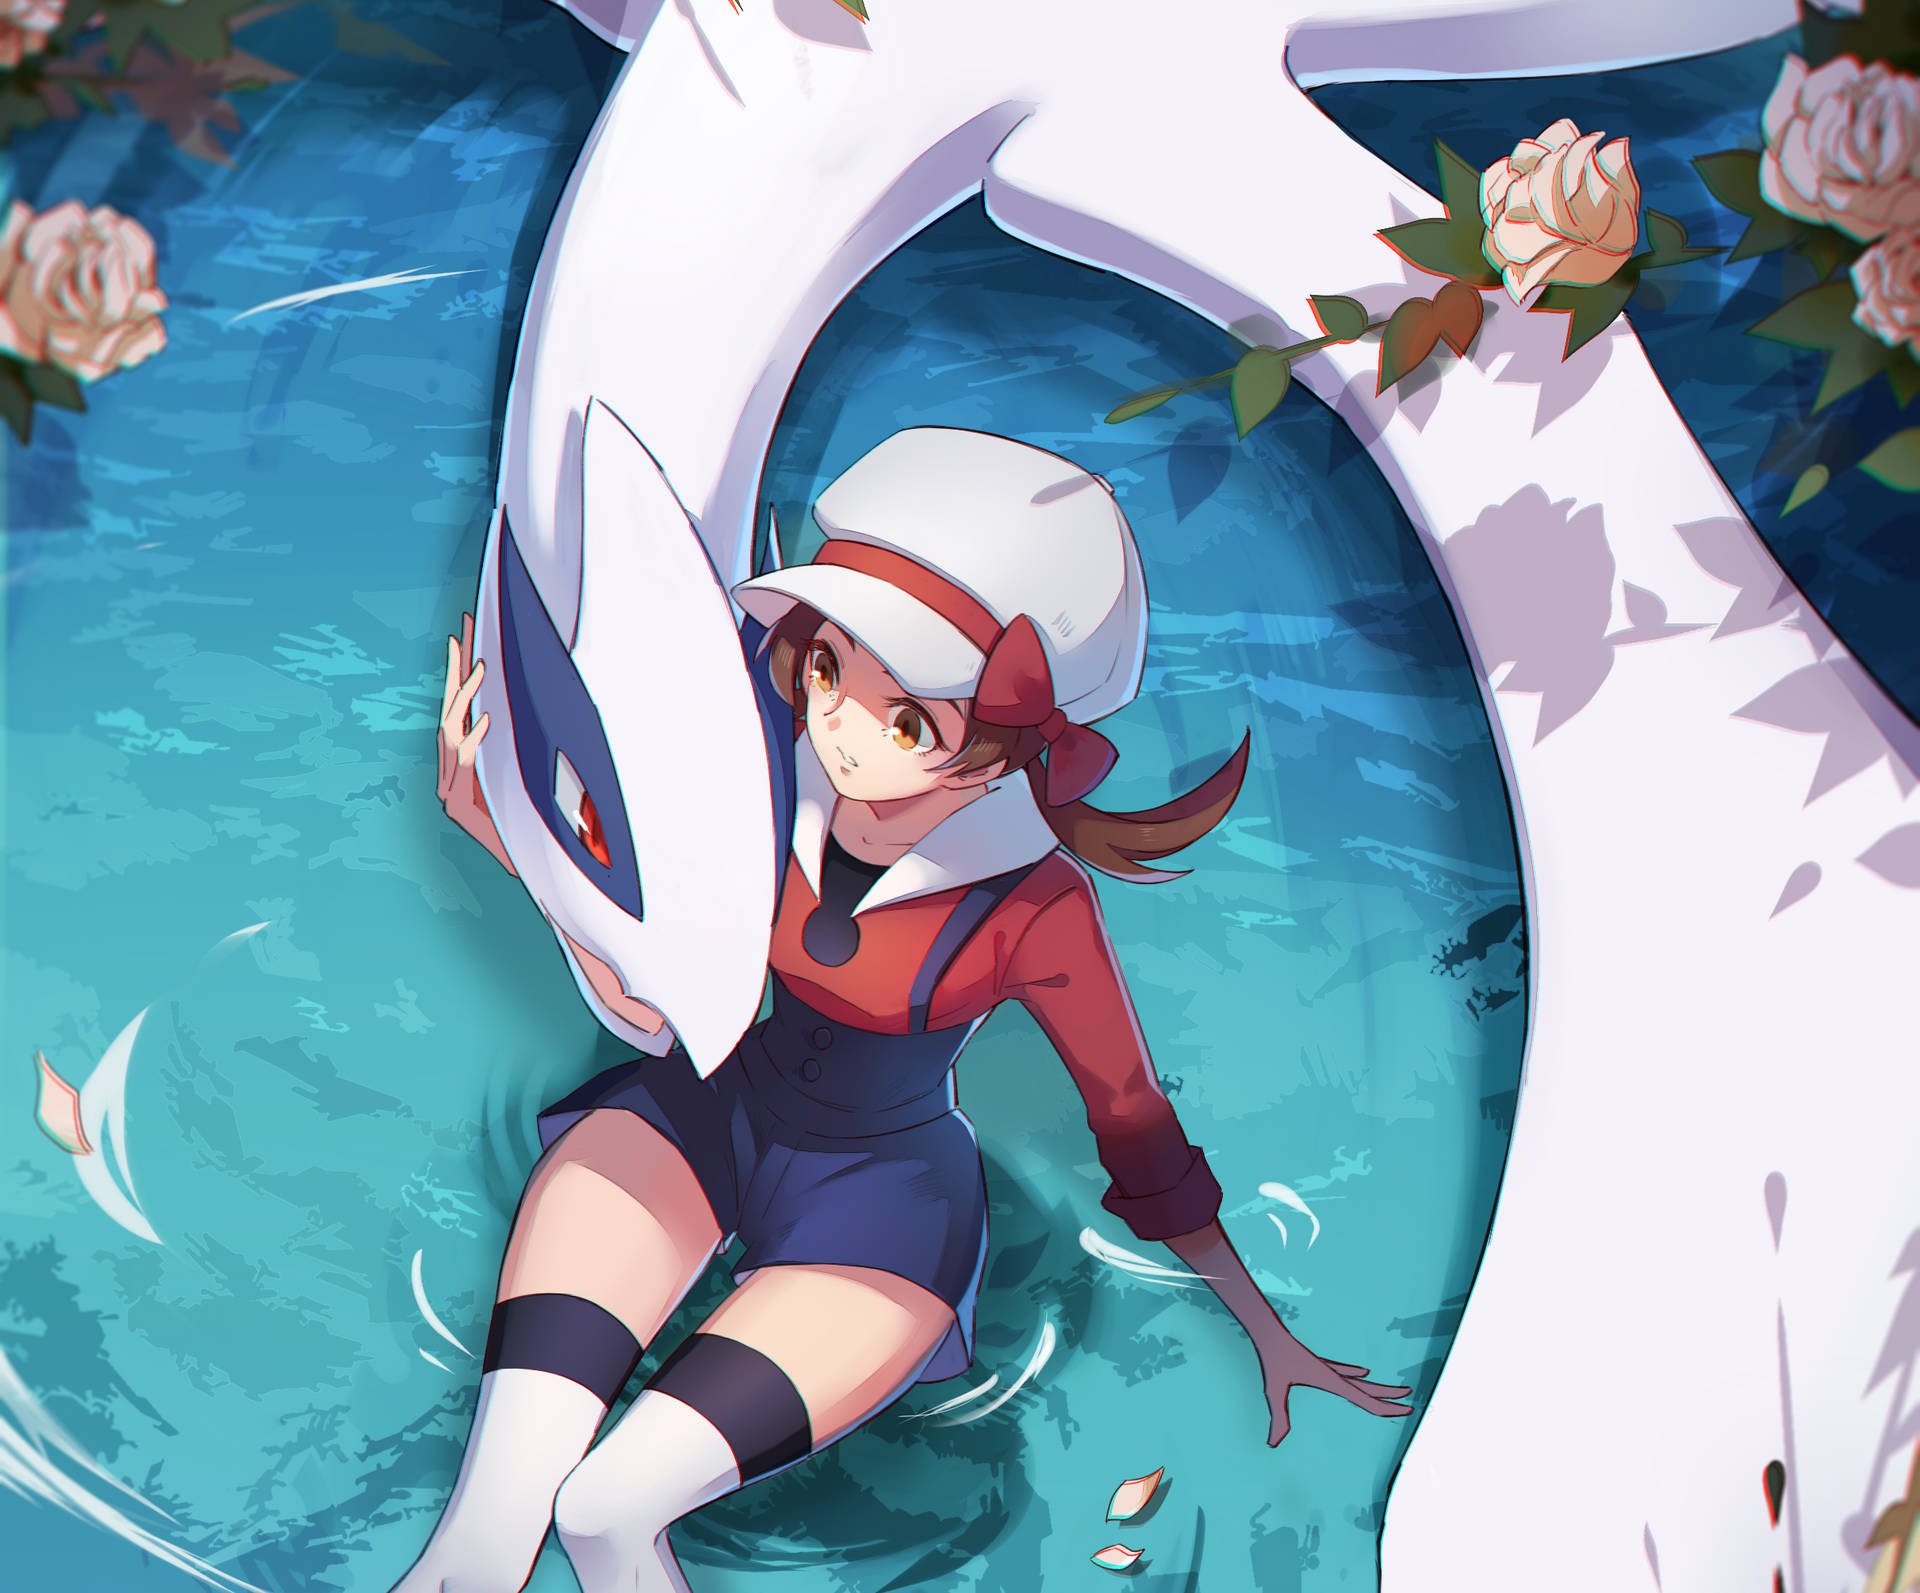 Lugia With A Girl Pokemon Trainer Wallpaper